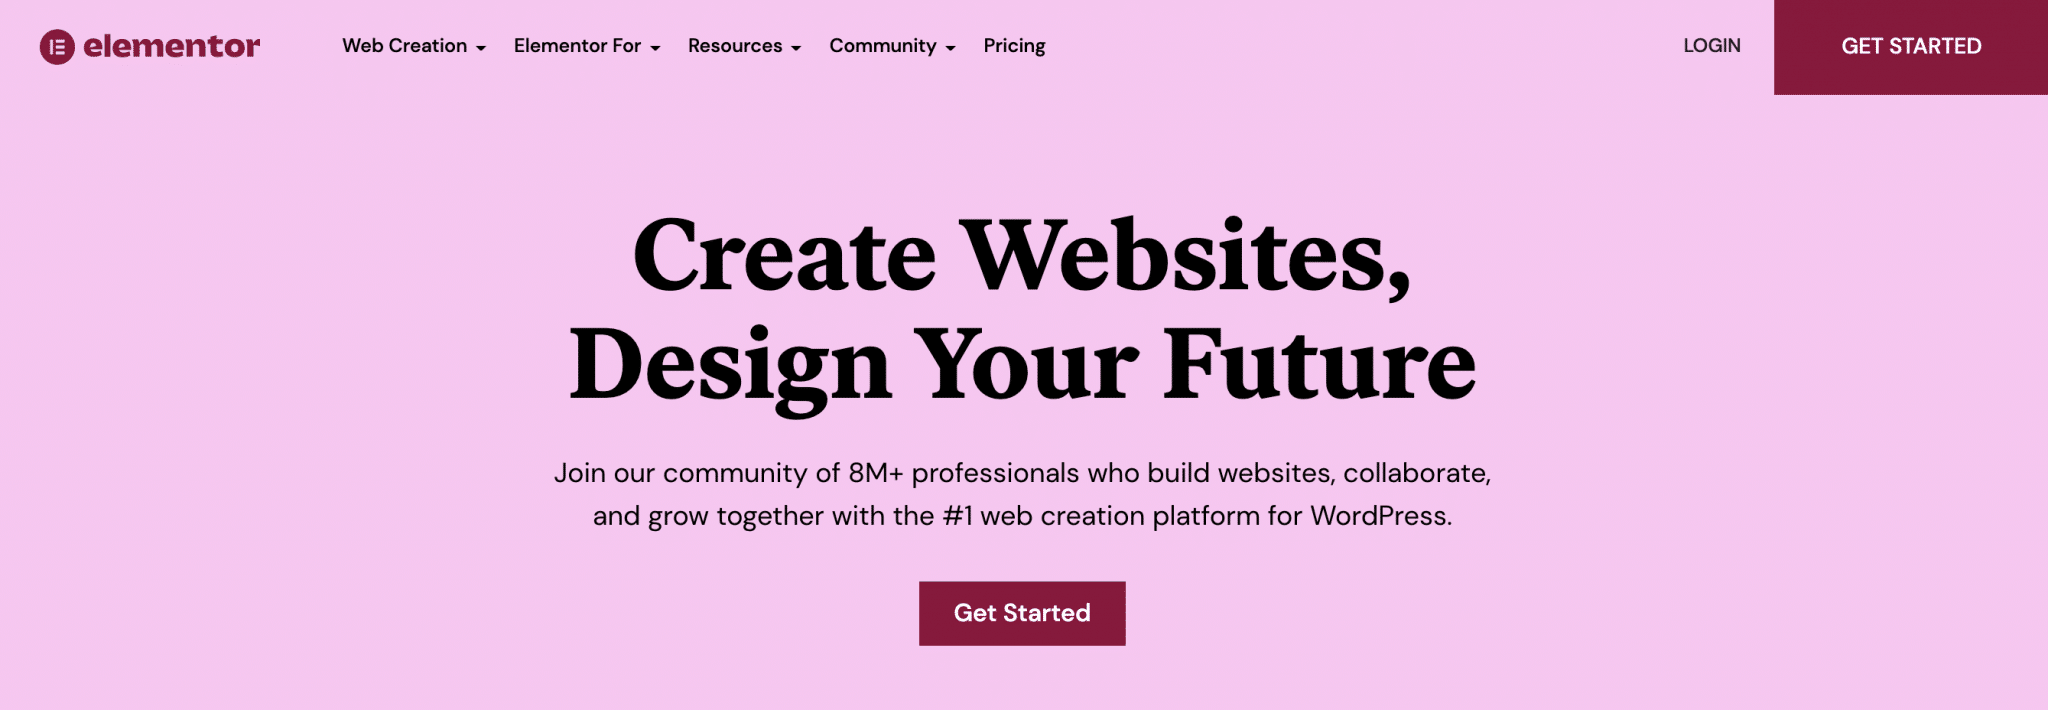 Elementor page builder to create websites and landing pages on WordPress.